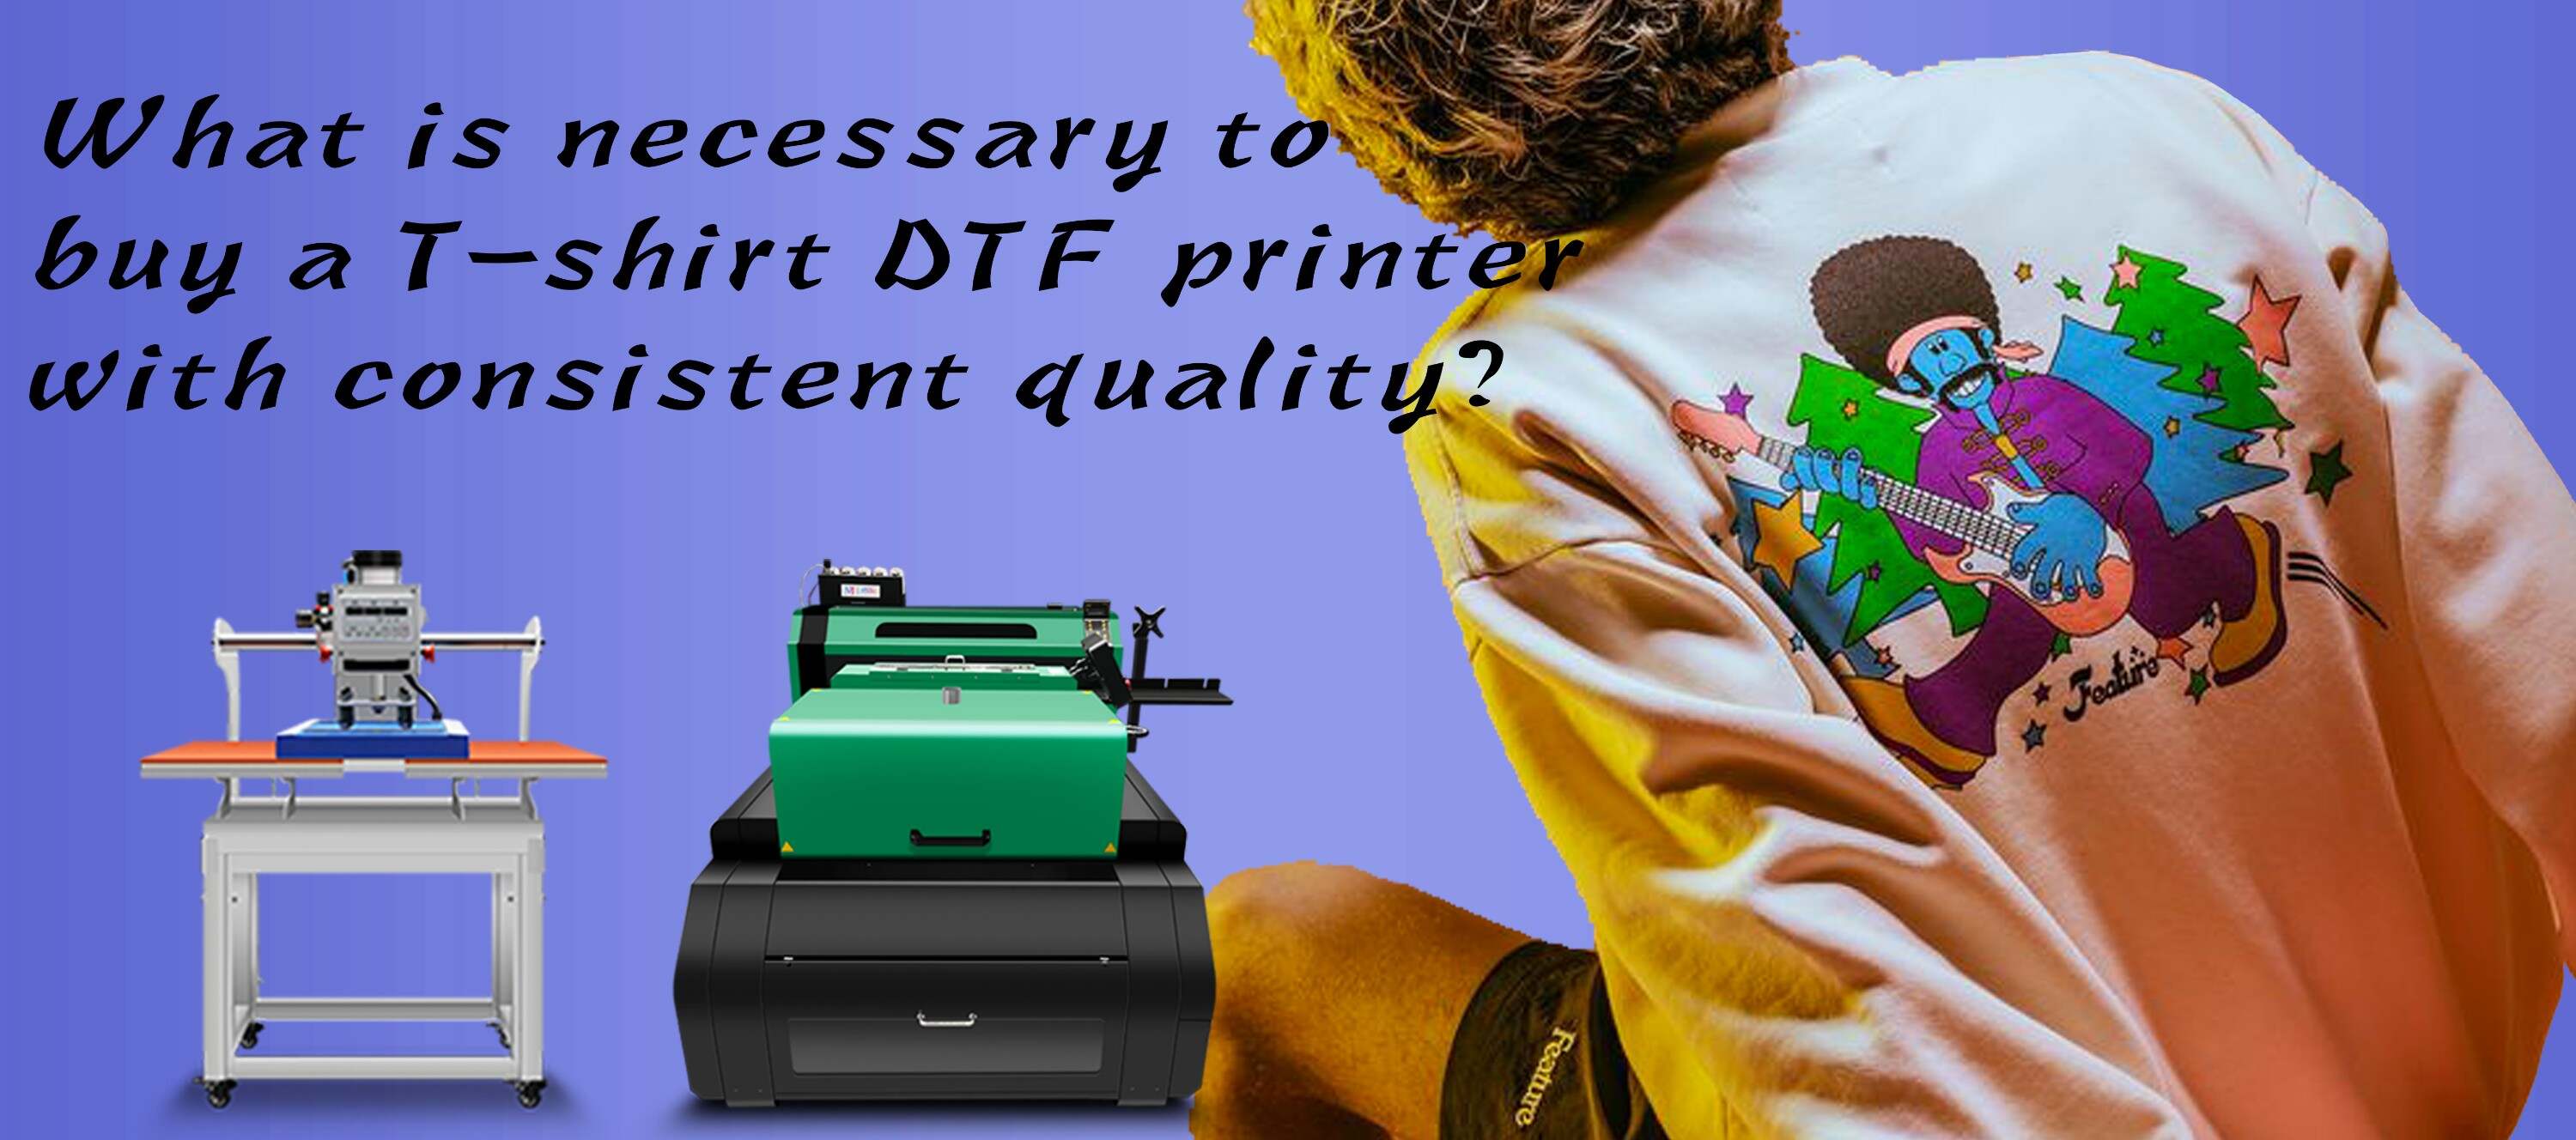 What is necessary to buy a T-shirt DTF printer with consistent quality__